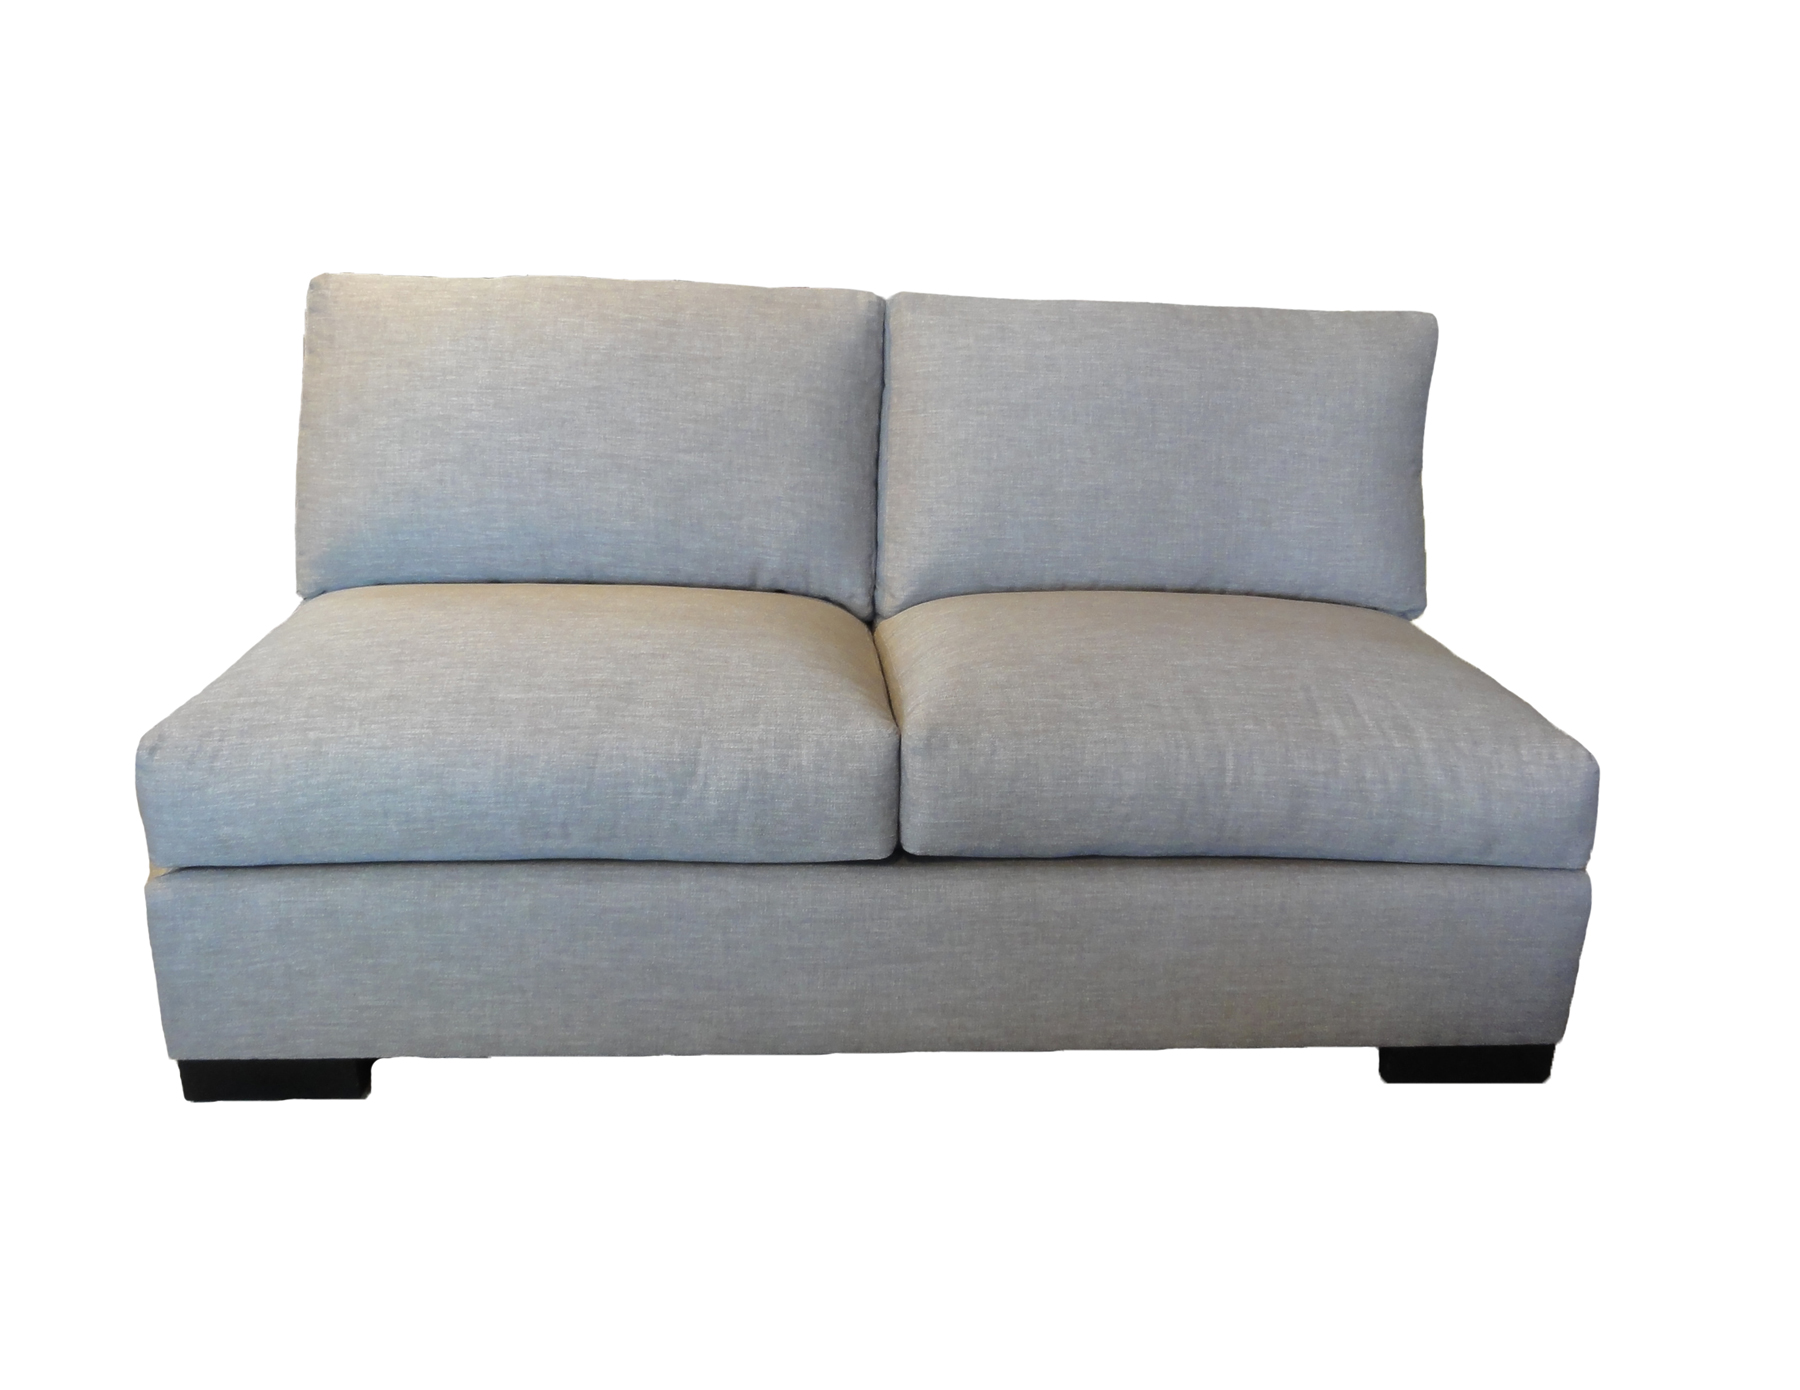 Sarah Armless sofa santa barbara design center rugs and more oriental carpet loveseat couch sectional